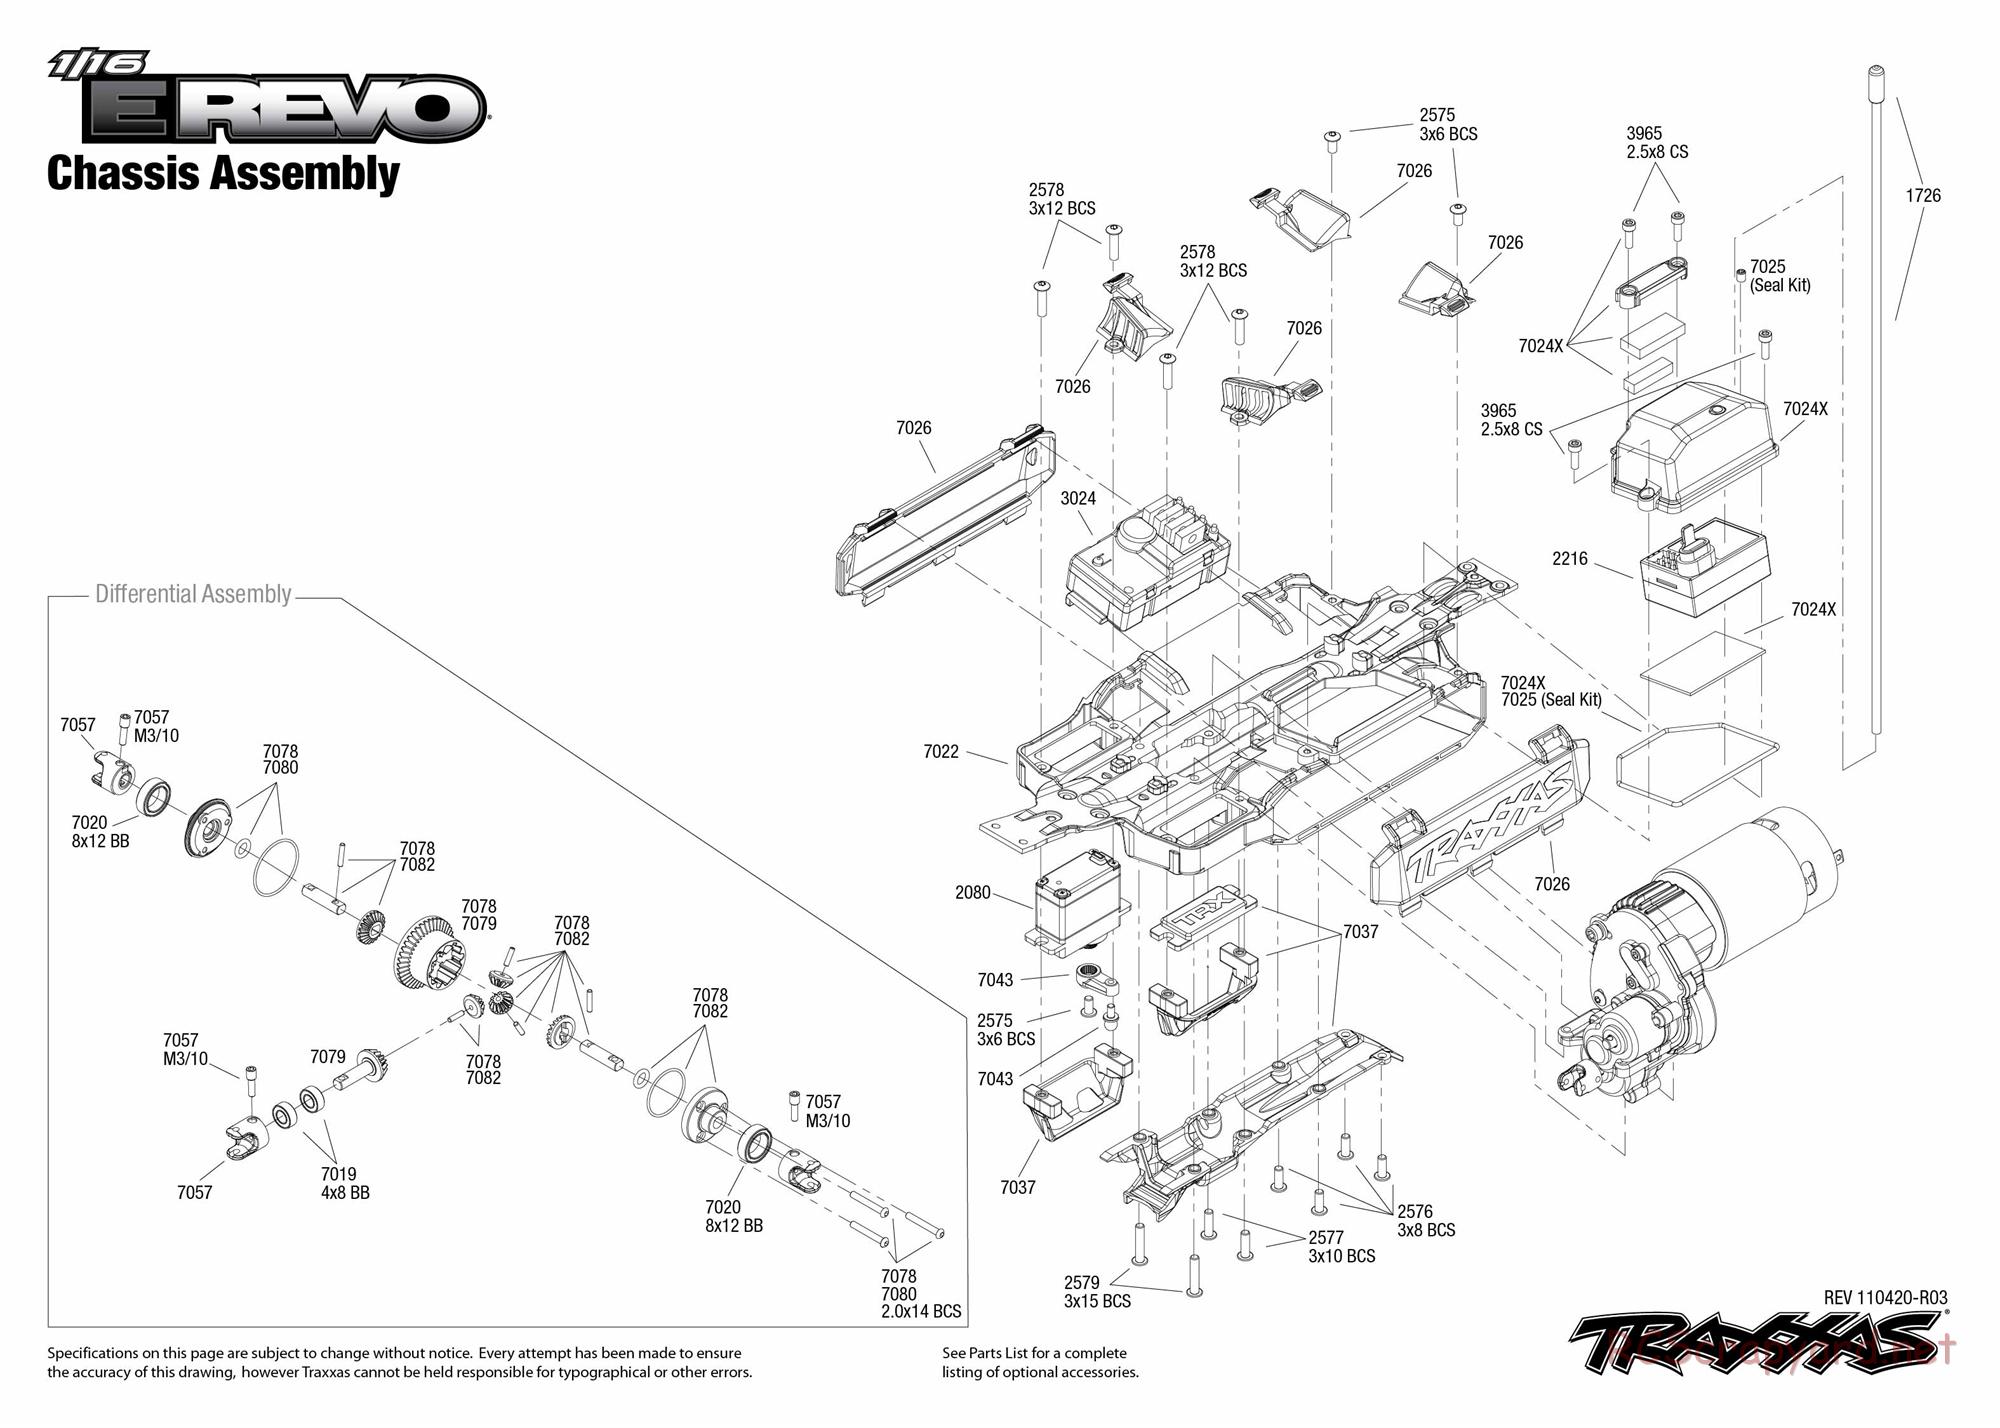 Traxxas - 1/16 E-Revo Brushed (2010) - Exploded Views - Page 1